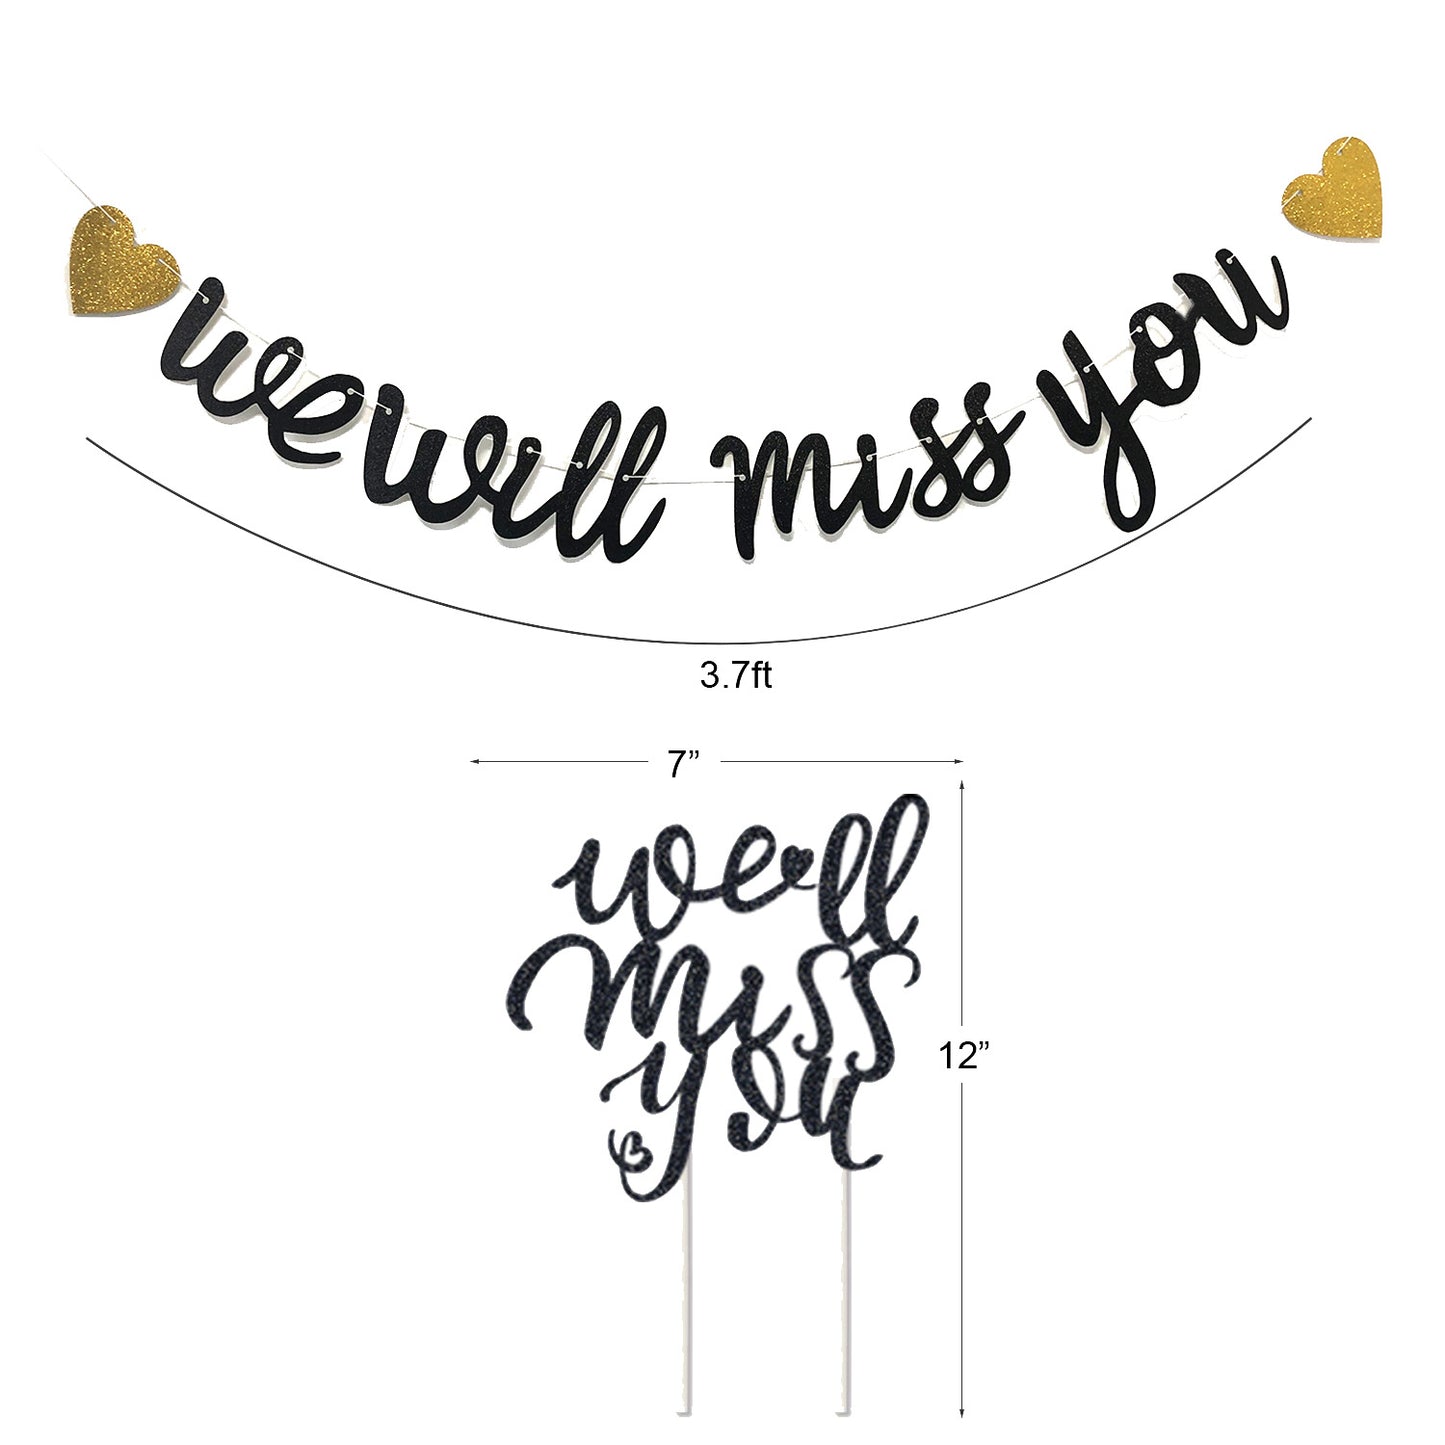 Farewell Party Decorations (Gold and Black)